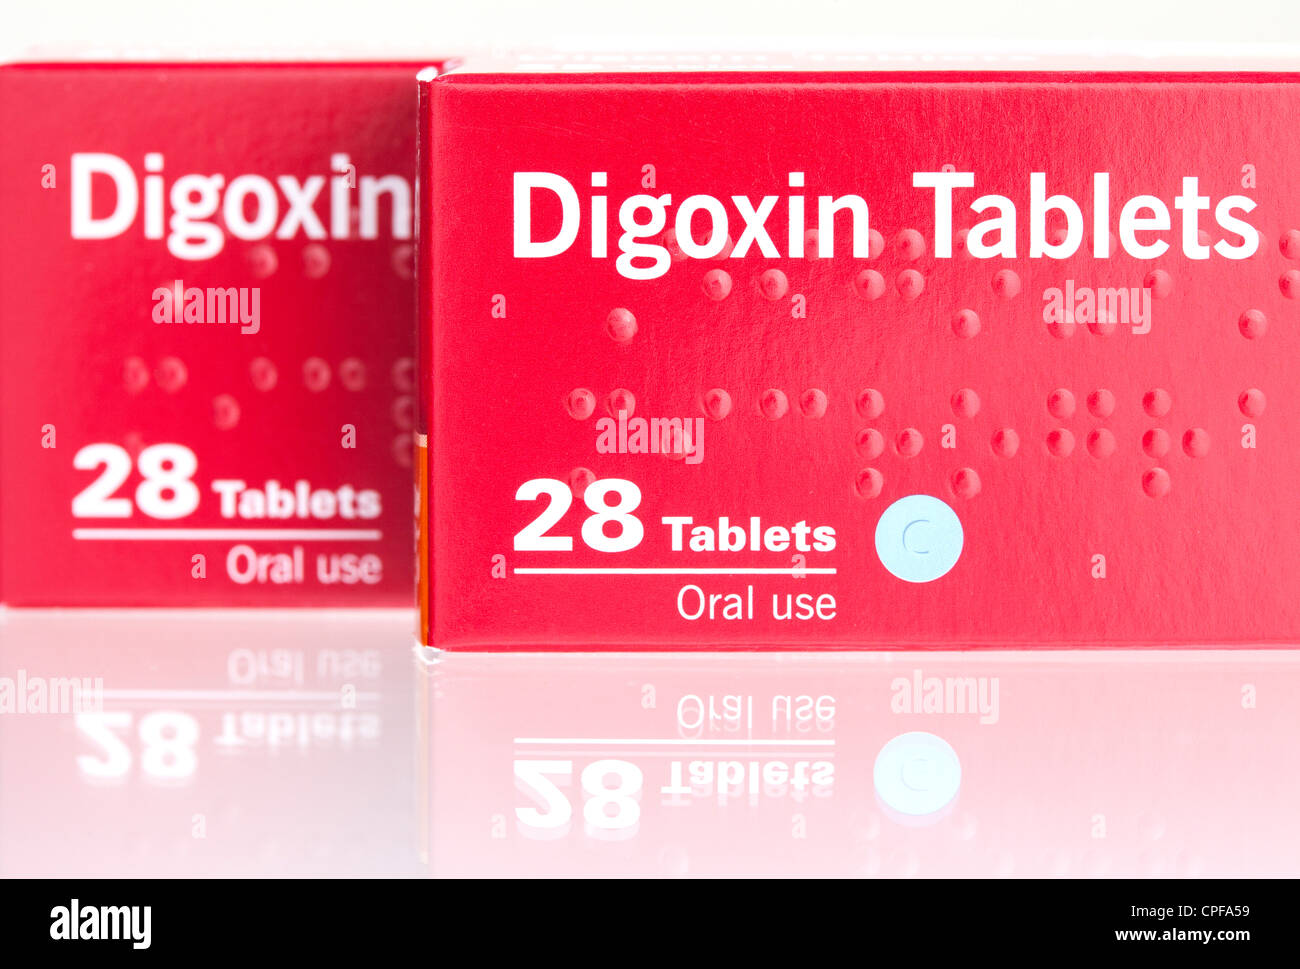 Digoxin tablets commonly used for heart conditions Stock Photo - Alamy